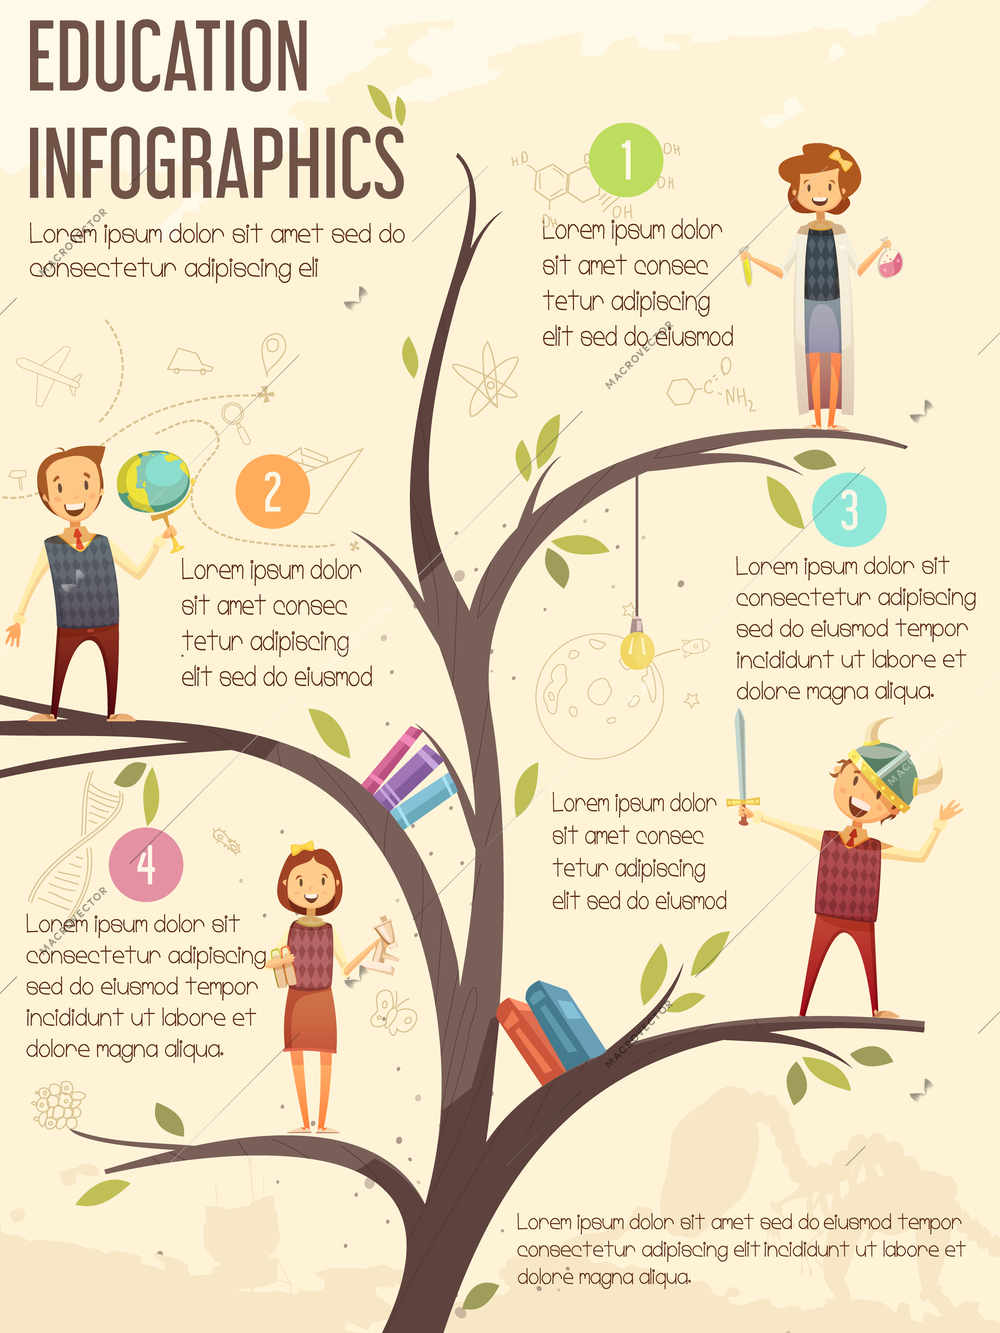 Elementary and middle school education guide cartoon tree diagram infographic poster with text descriptions and symbols vector illustration